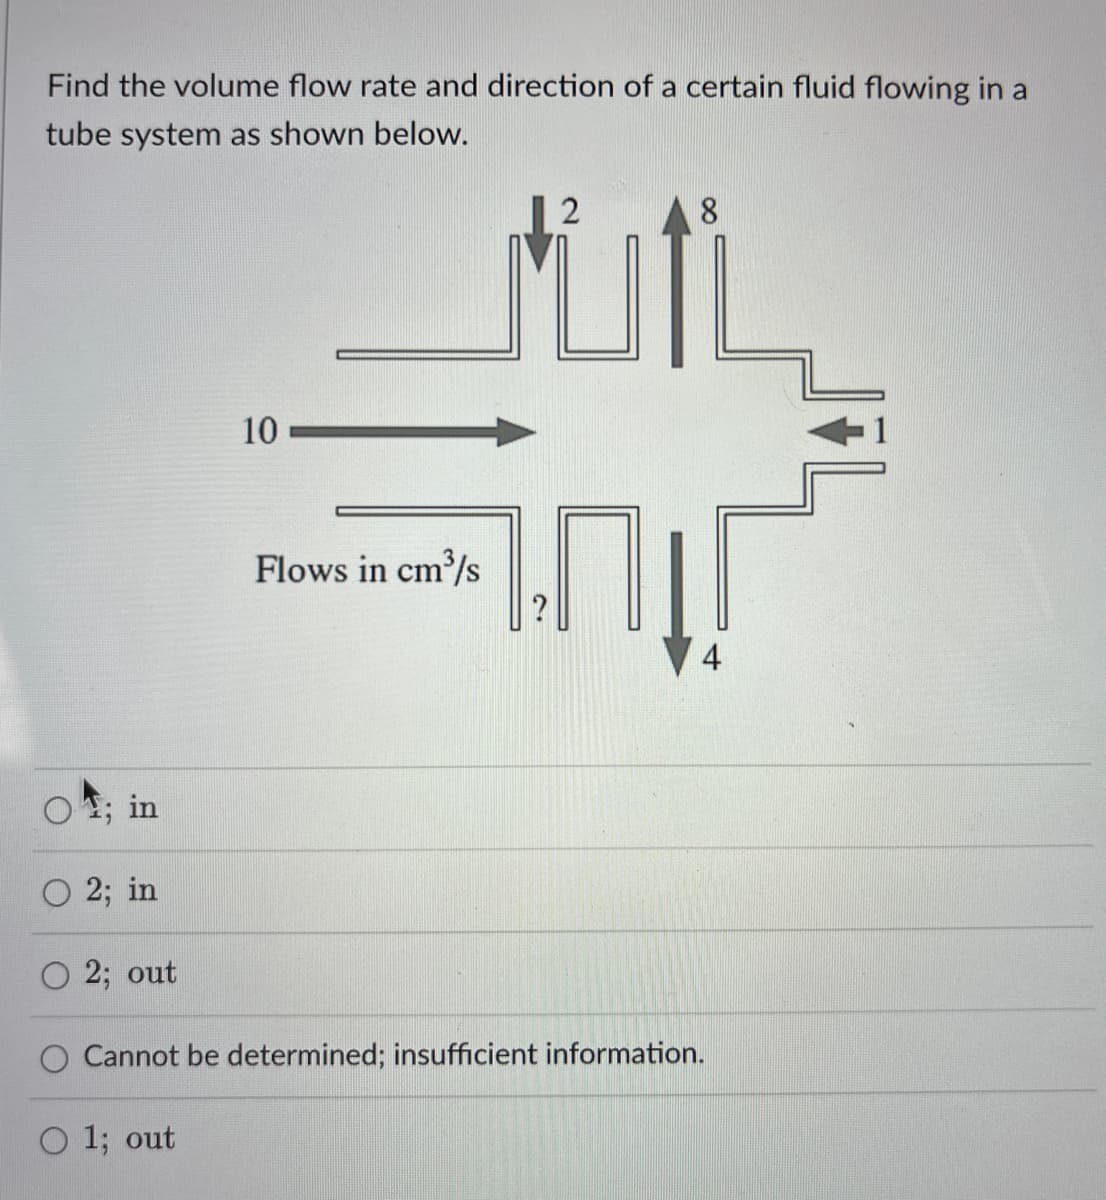 Find the volume flow rate and direction of a certain fluid flowing in a
tube system as shown below.
2
8
10
Flows in cm³/s
1.01
4
in
O 2; in
O 2; out
Cannot be determined; insufficient information.
O 1; out